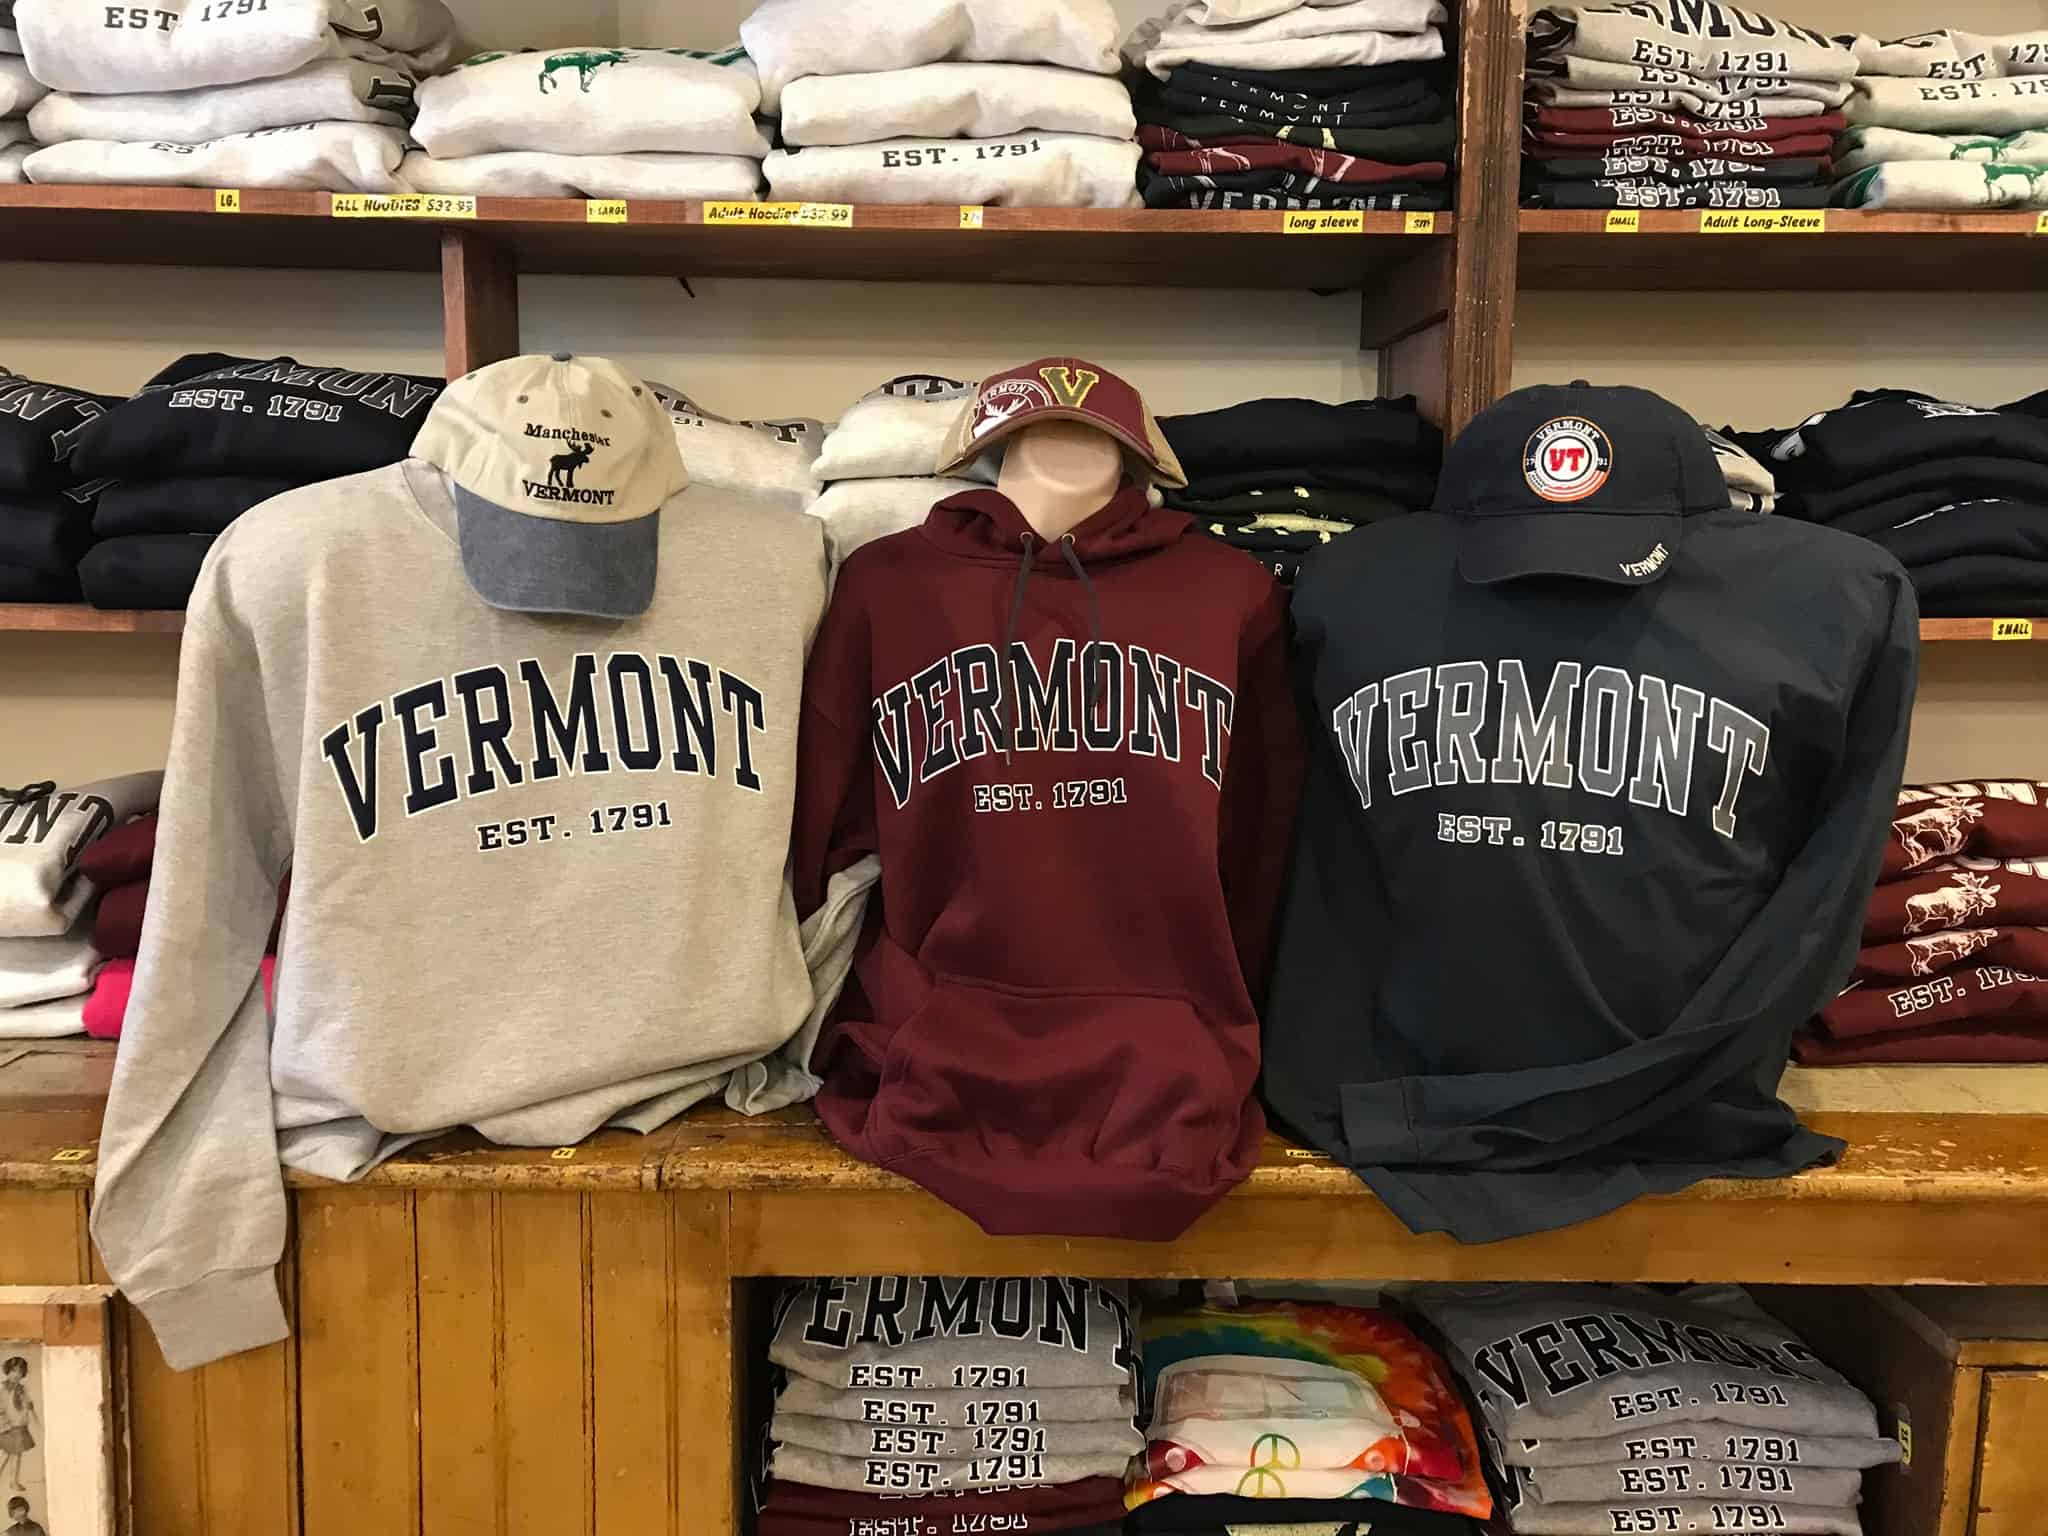 Above All Vermont - Apparel